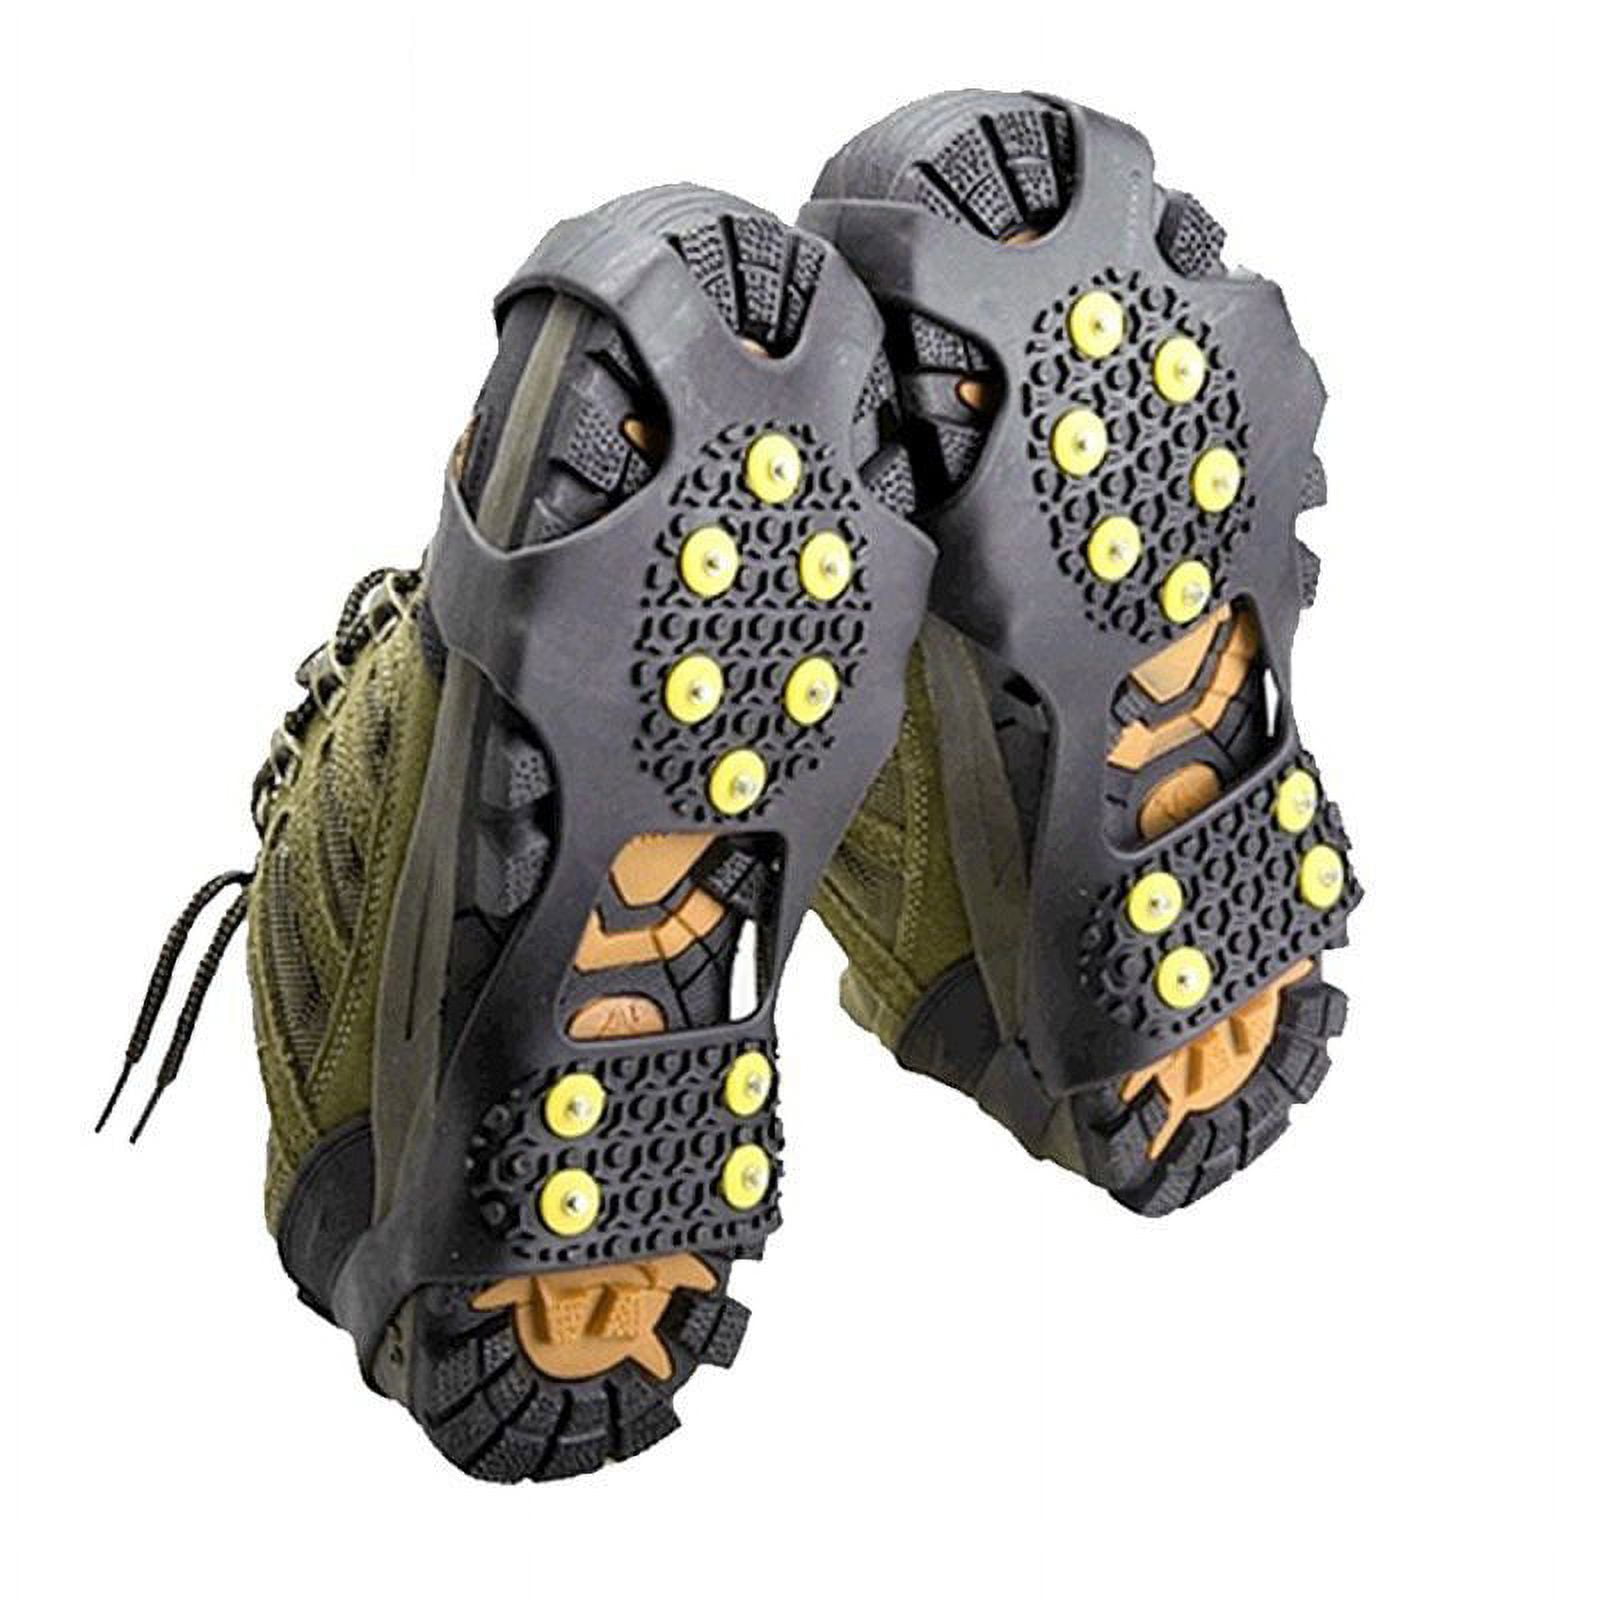 2 Pairs Ice Cleats for Shoes and Boots, Non Slip Gripper Spike, Ice  Grippers Traction Cleats Snow Shoe Spikes Grips Crampons with 10 Steel  Studs